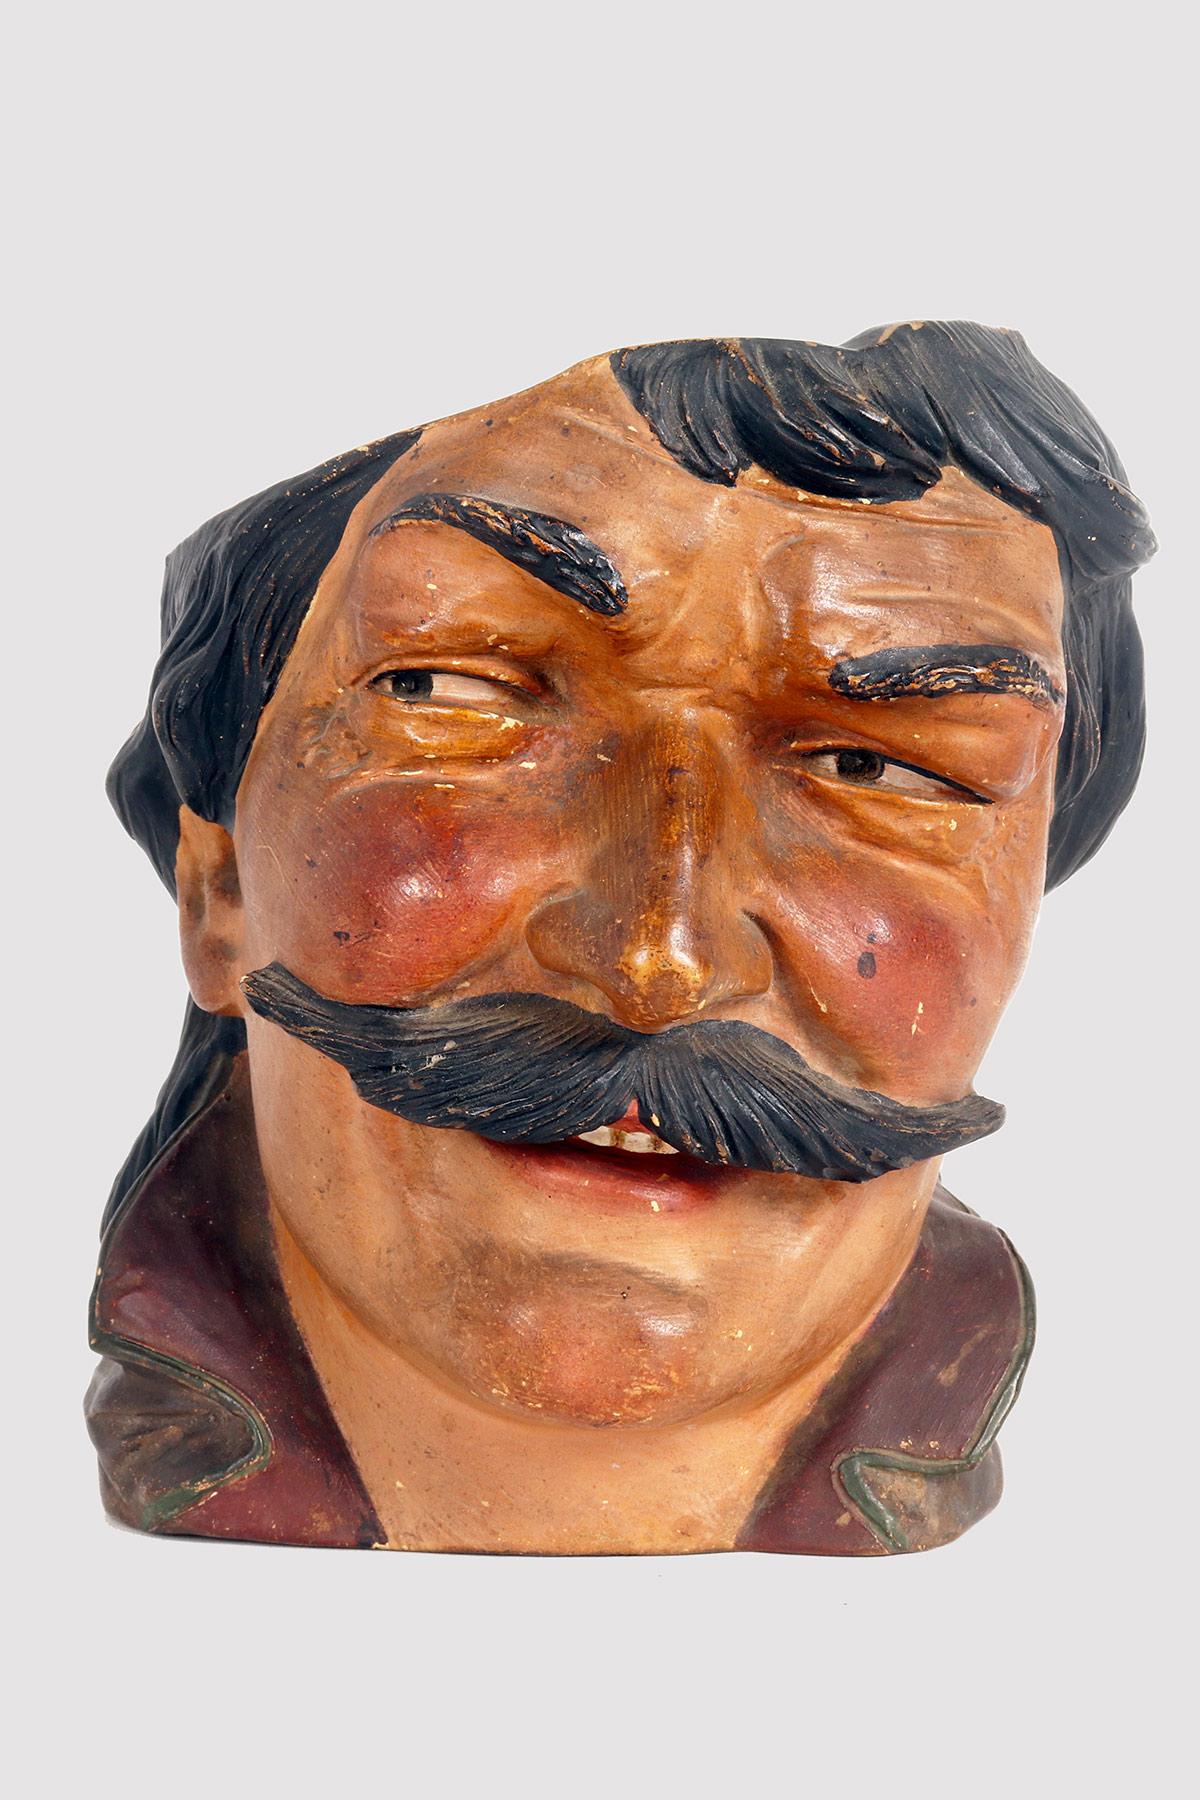 Terracotta vase finished in color depicting the head of a man with mustache. Austria, around 1890.